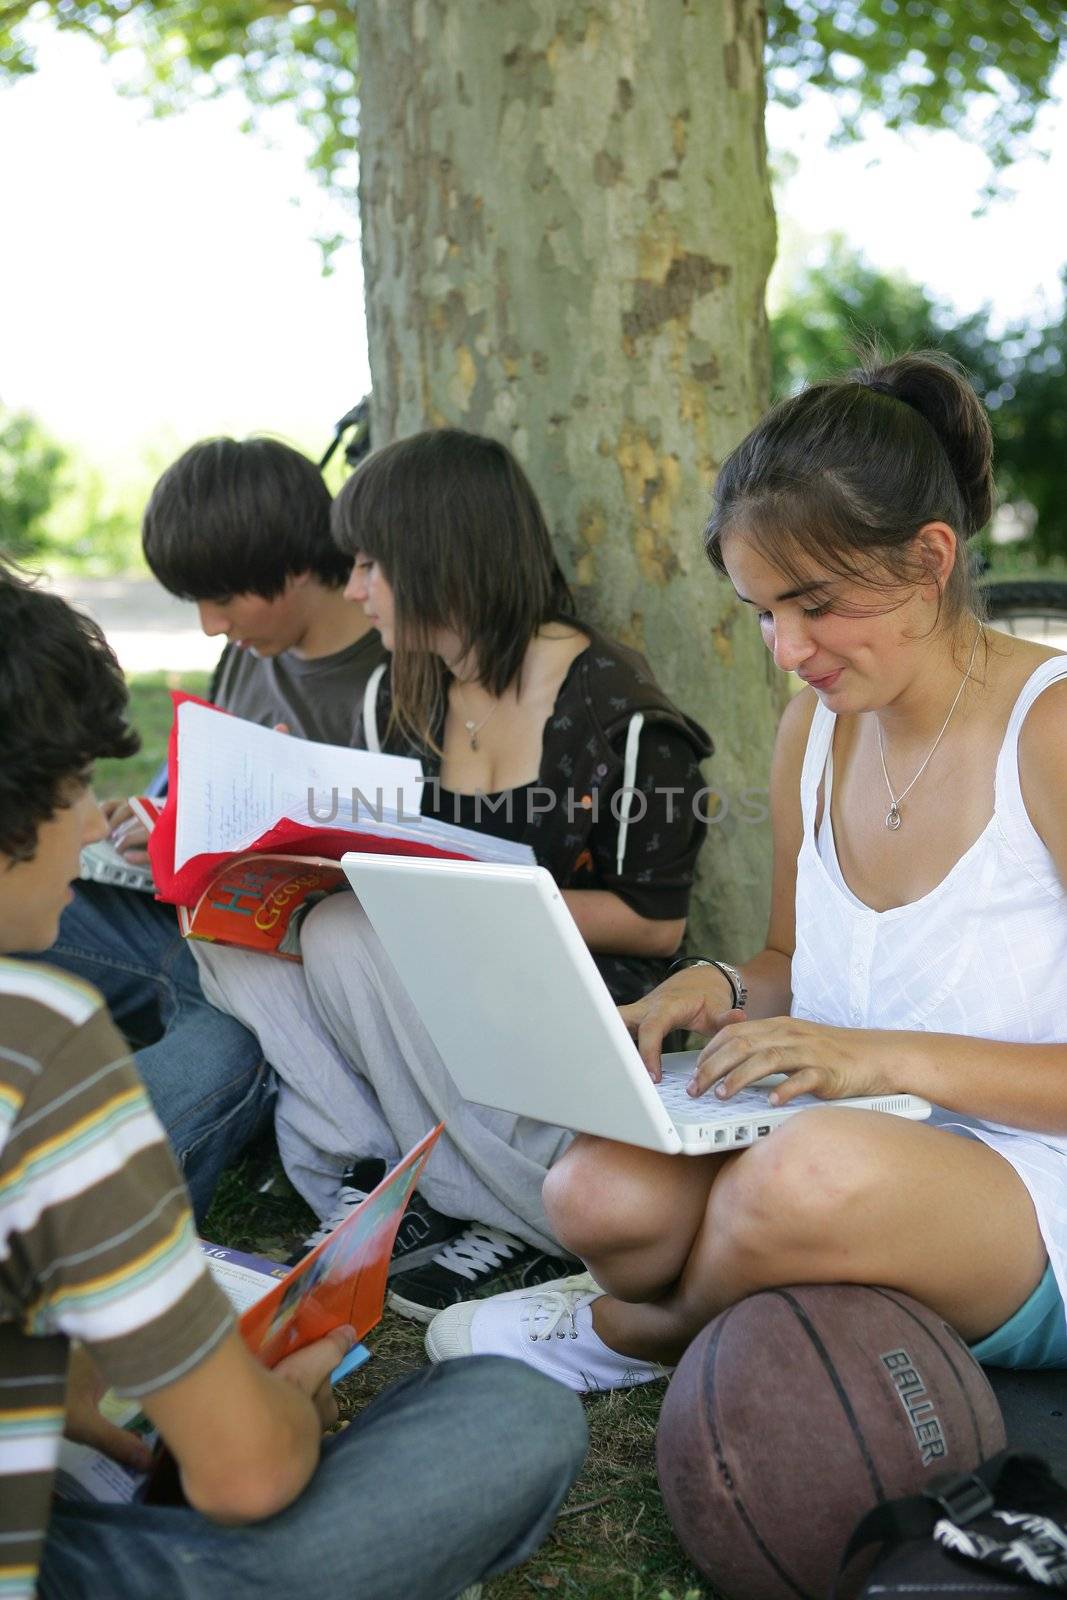 Teens sat by a tree studying